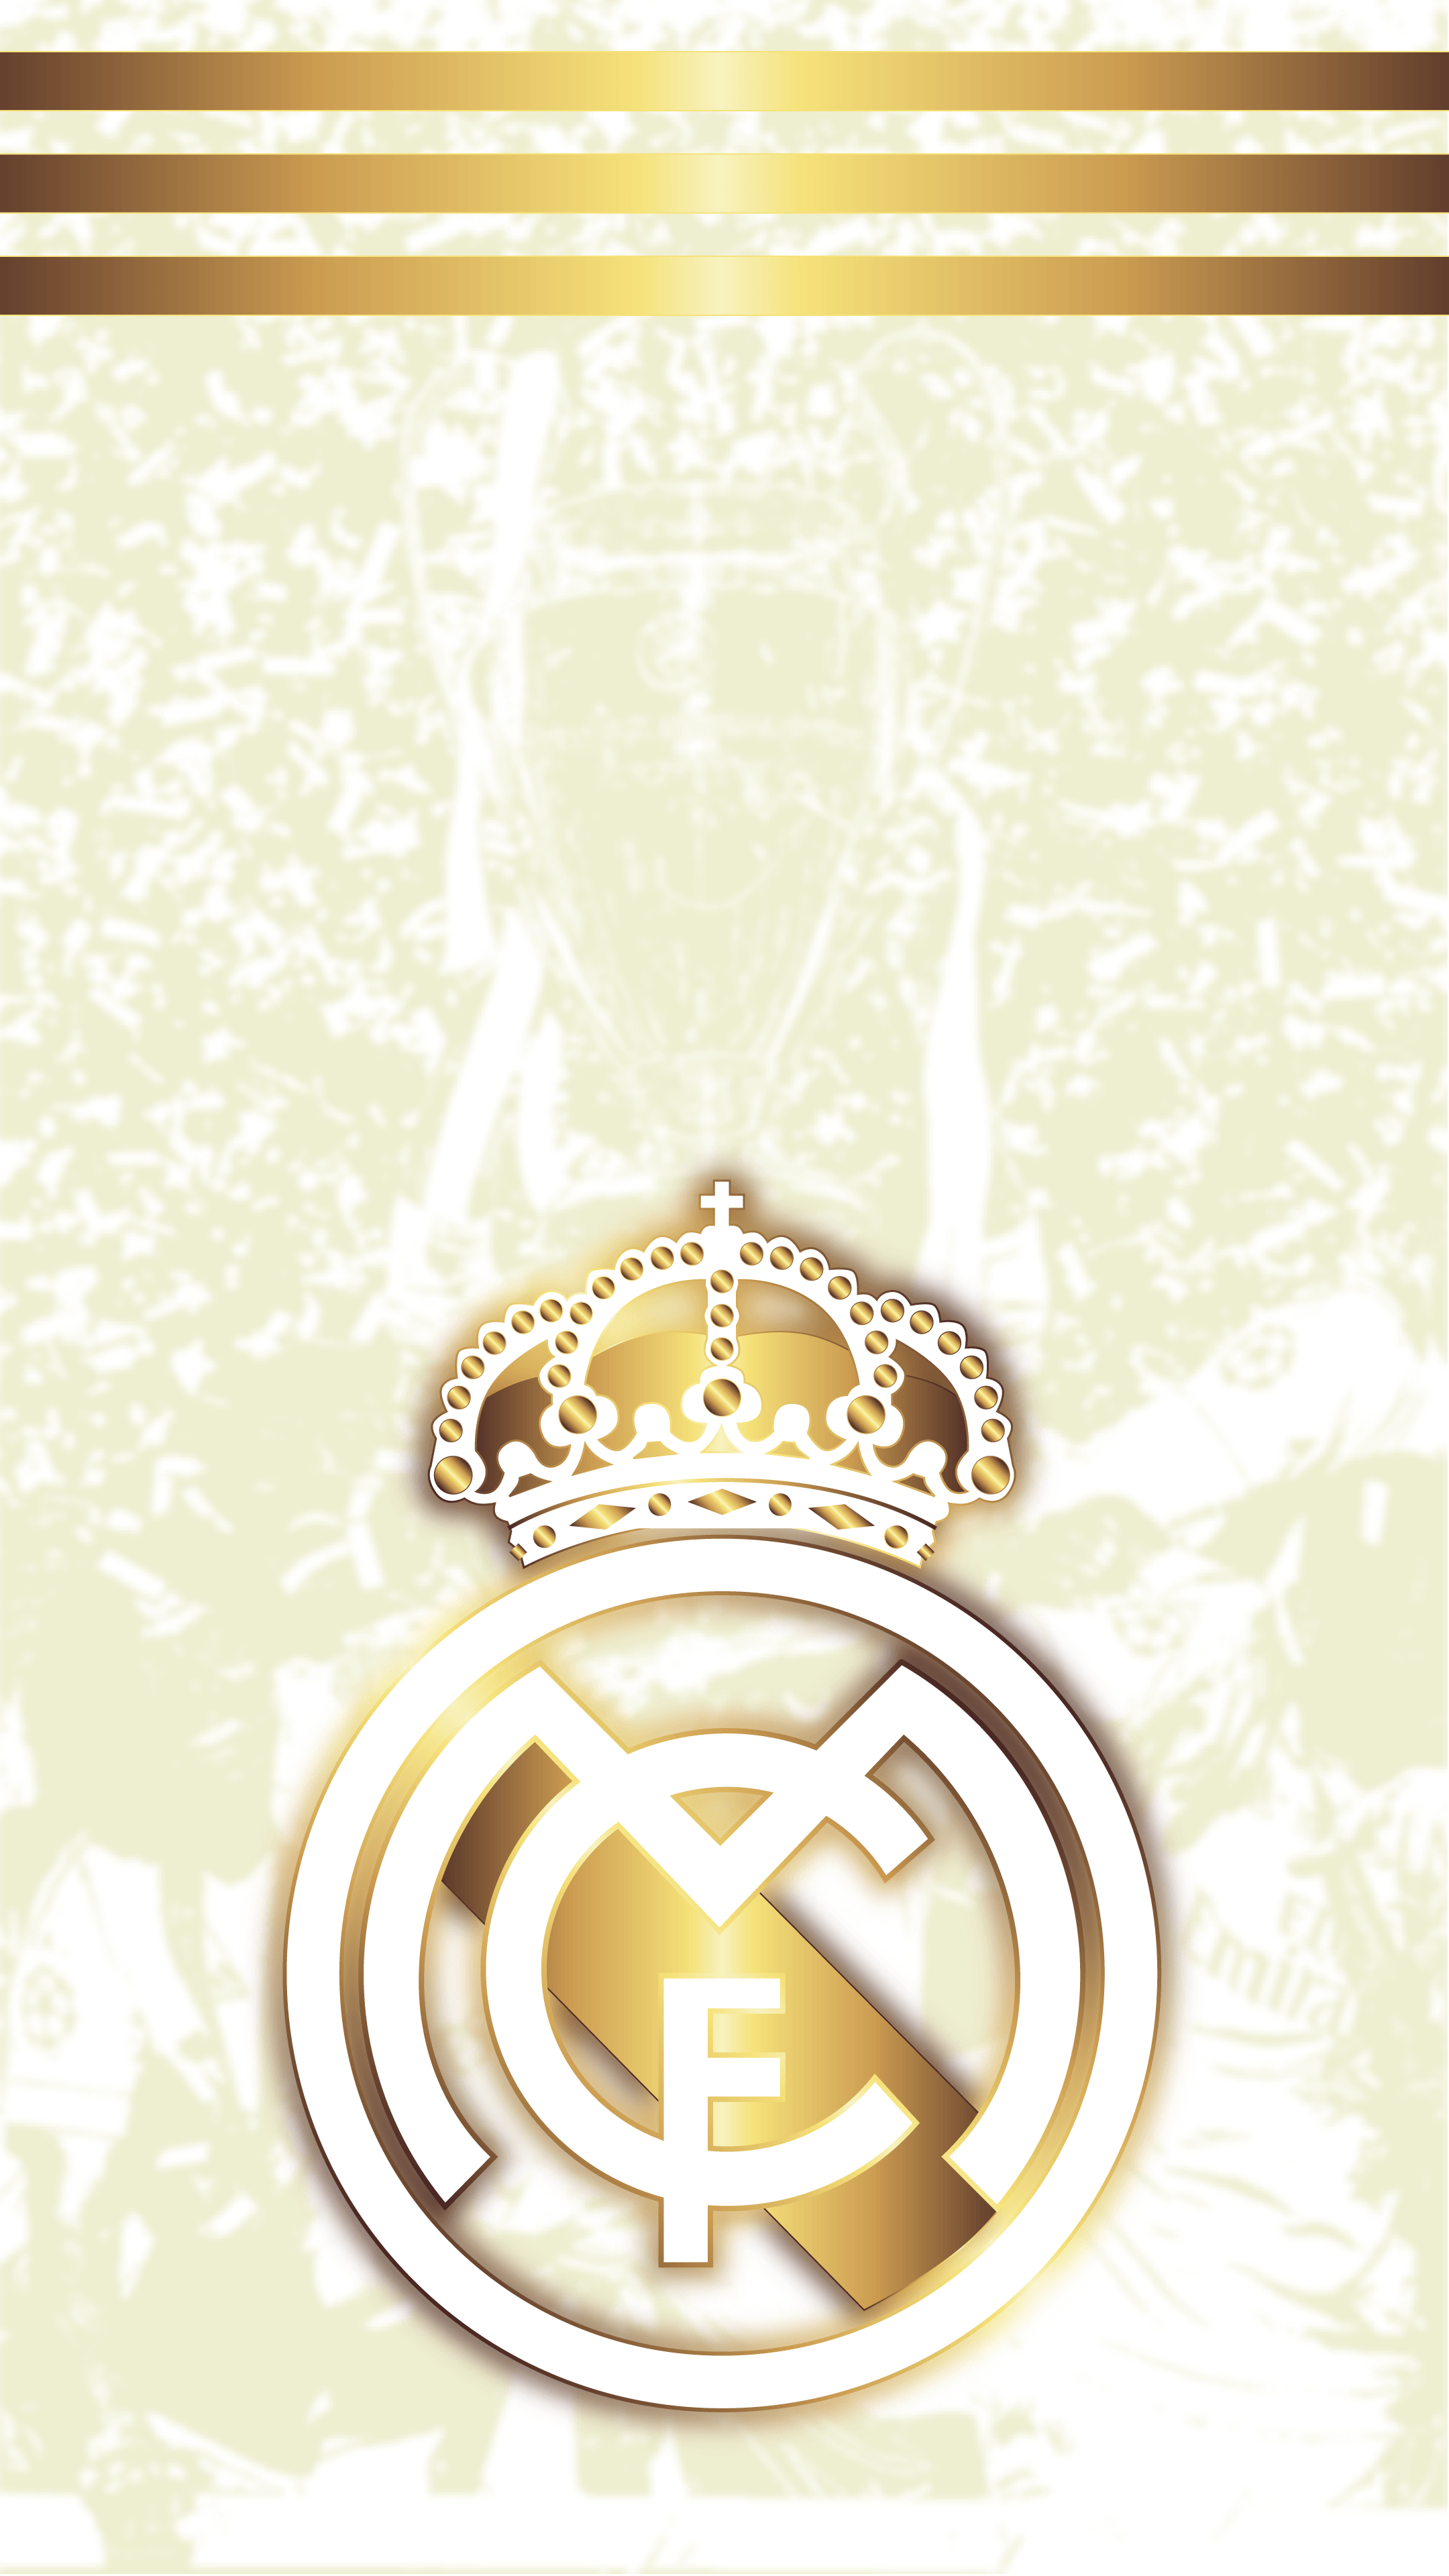 Real Madrid 2019 Android Wallpapers - Wallpaper Cave